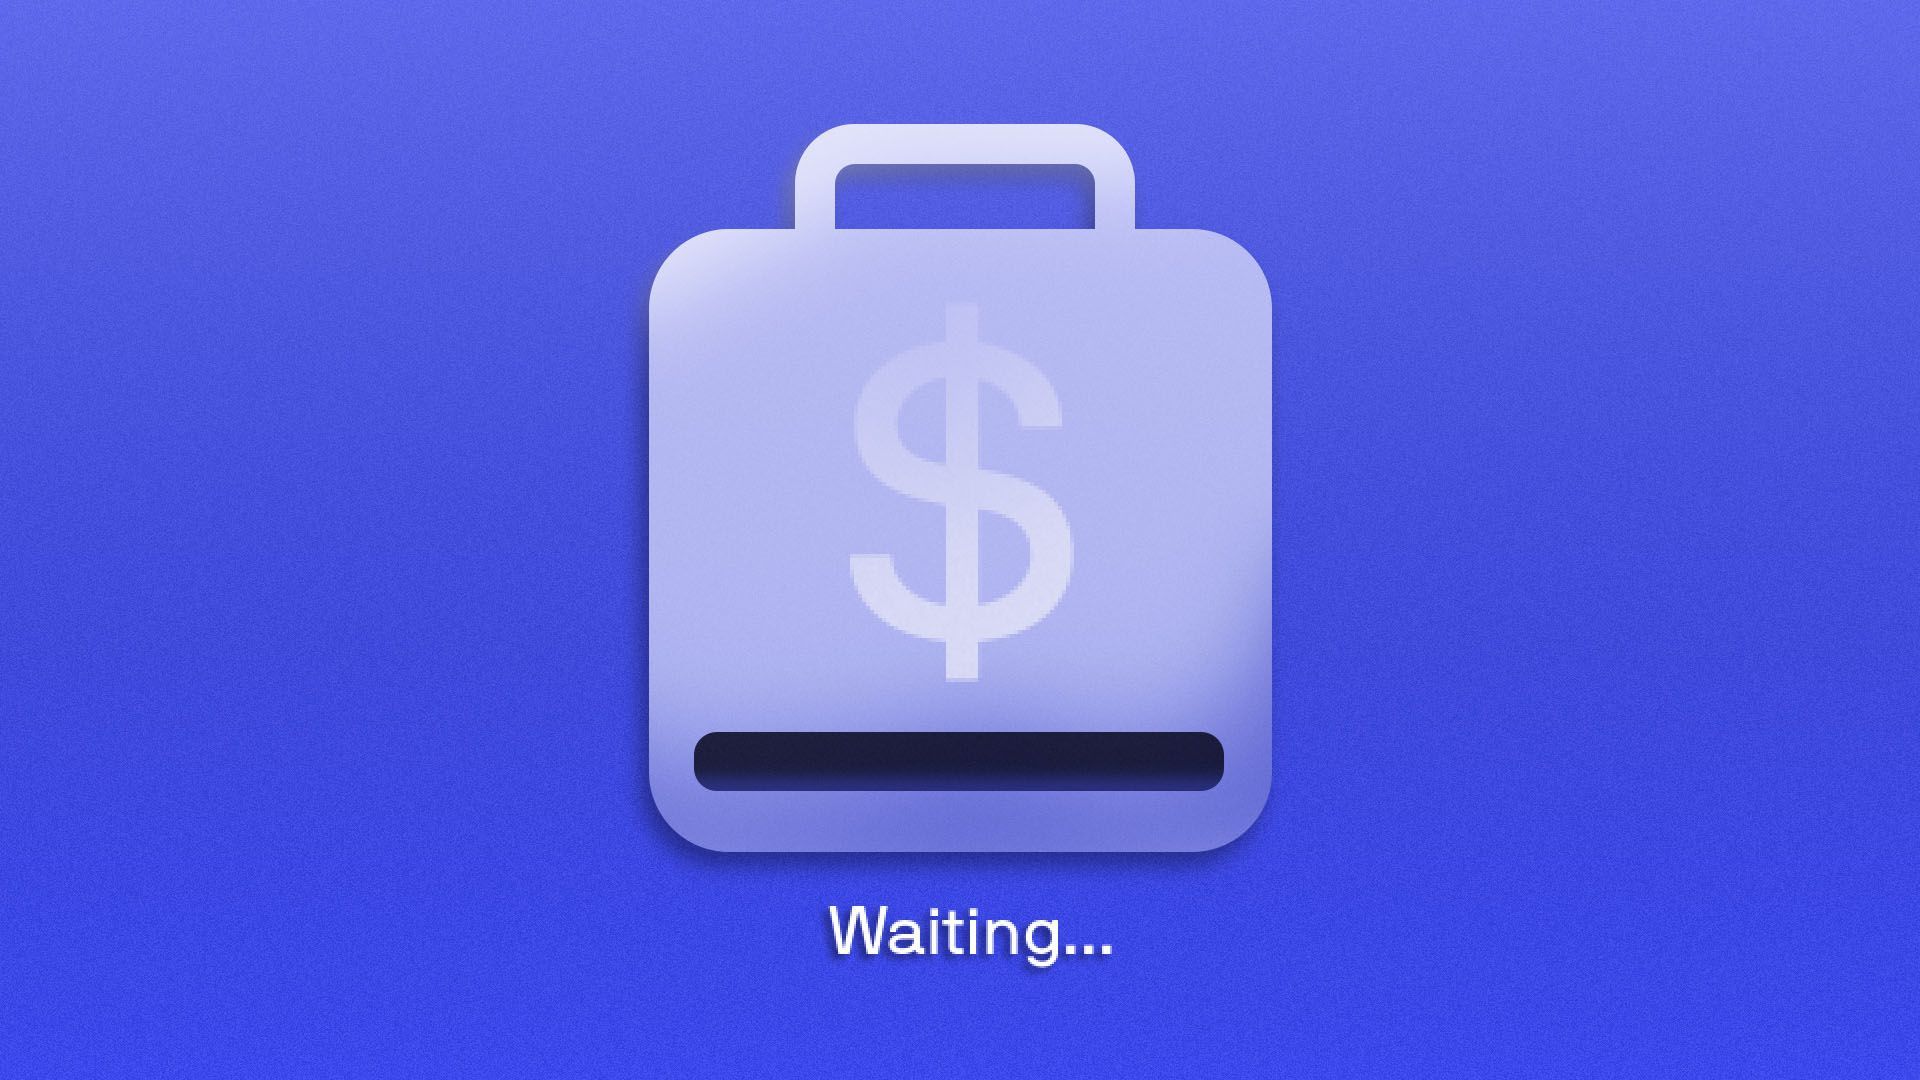 Illustration of an app shaped like a briefcase with a dollar sign on it waiting to download 